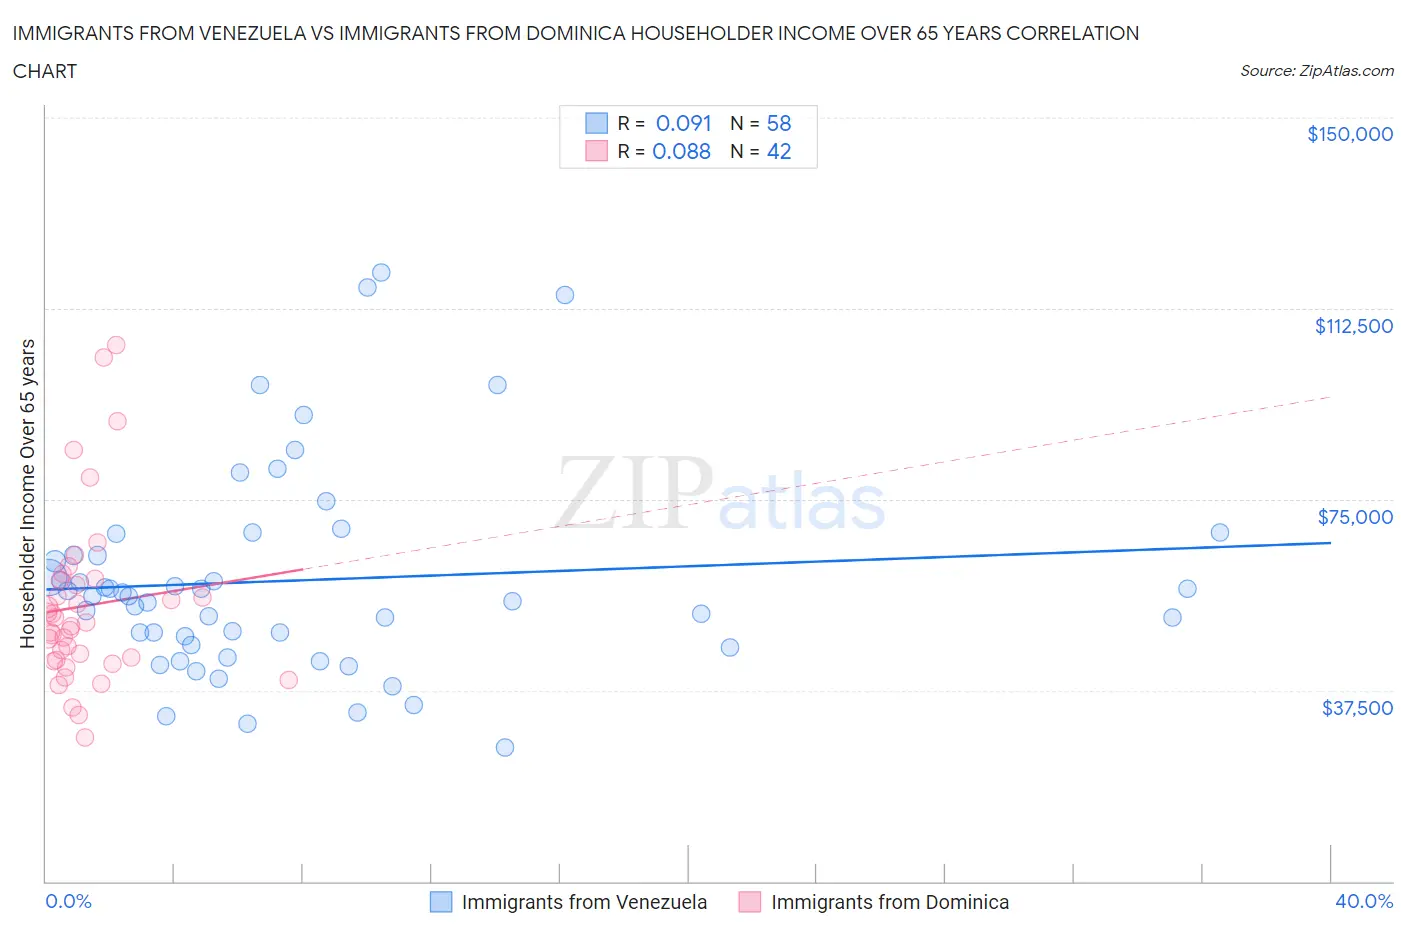 Immigrants from Venezuela vs Immigrants from Dominica Householder Income Over 65 years